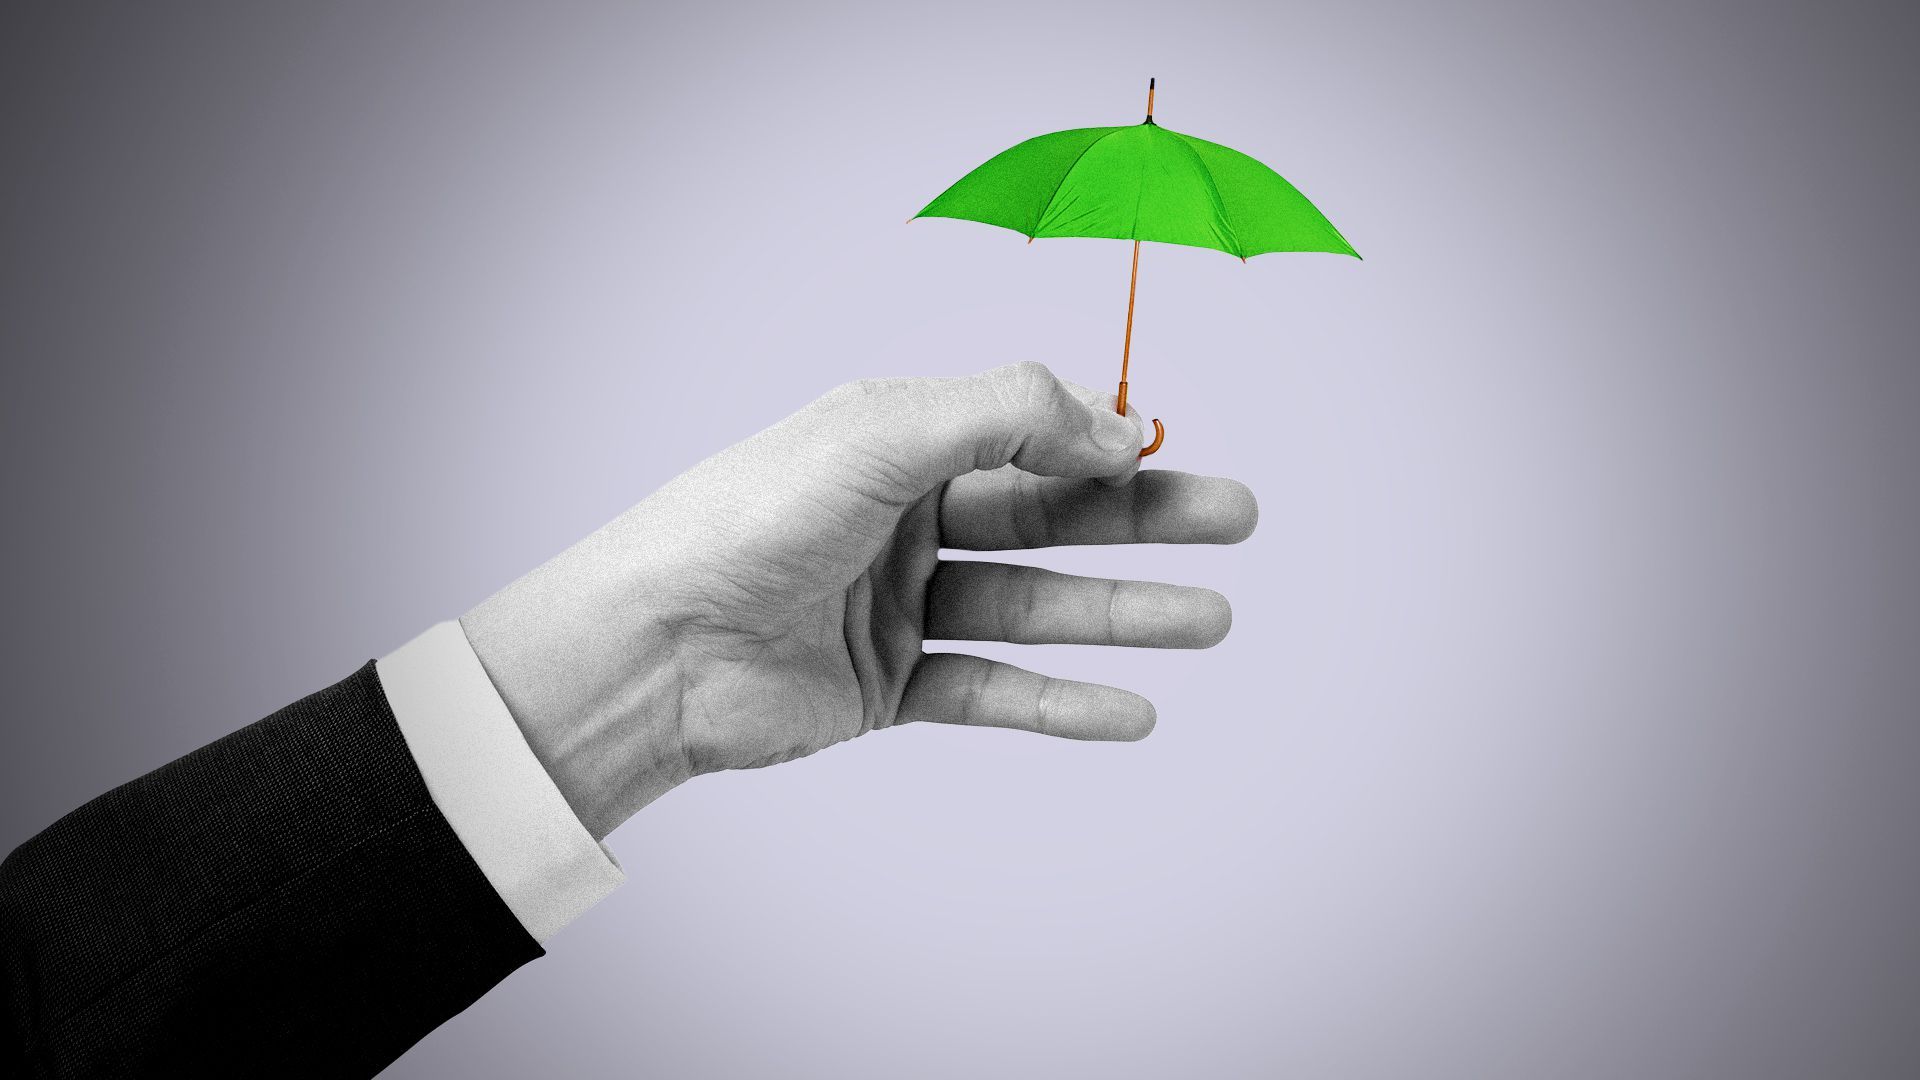 Illustration of a hand holding out a tiny umbrella